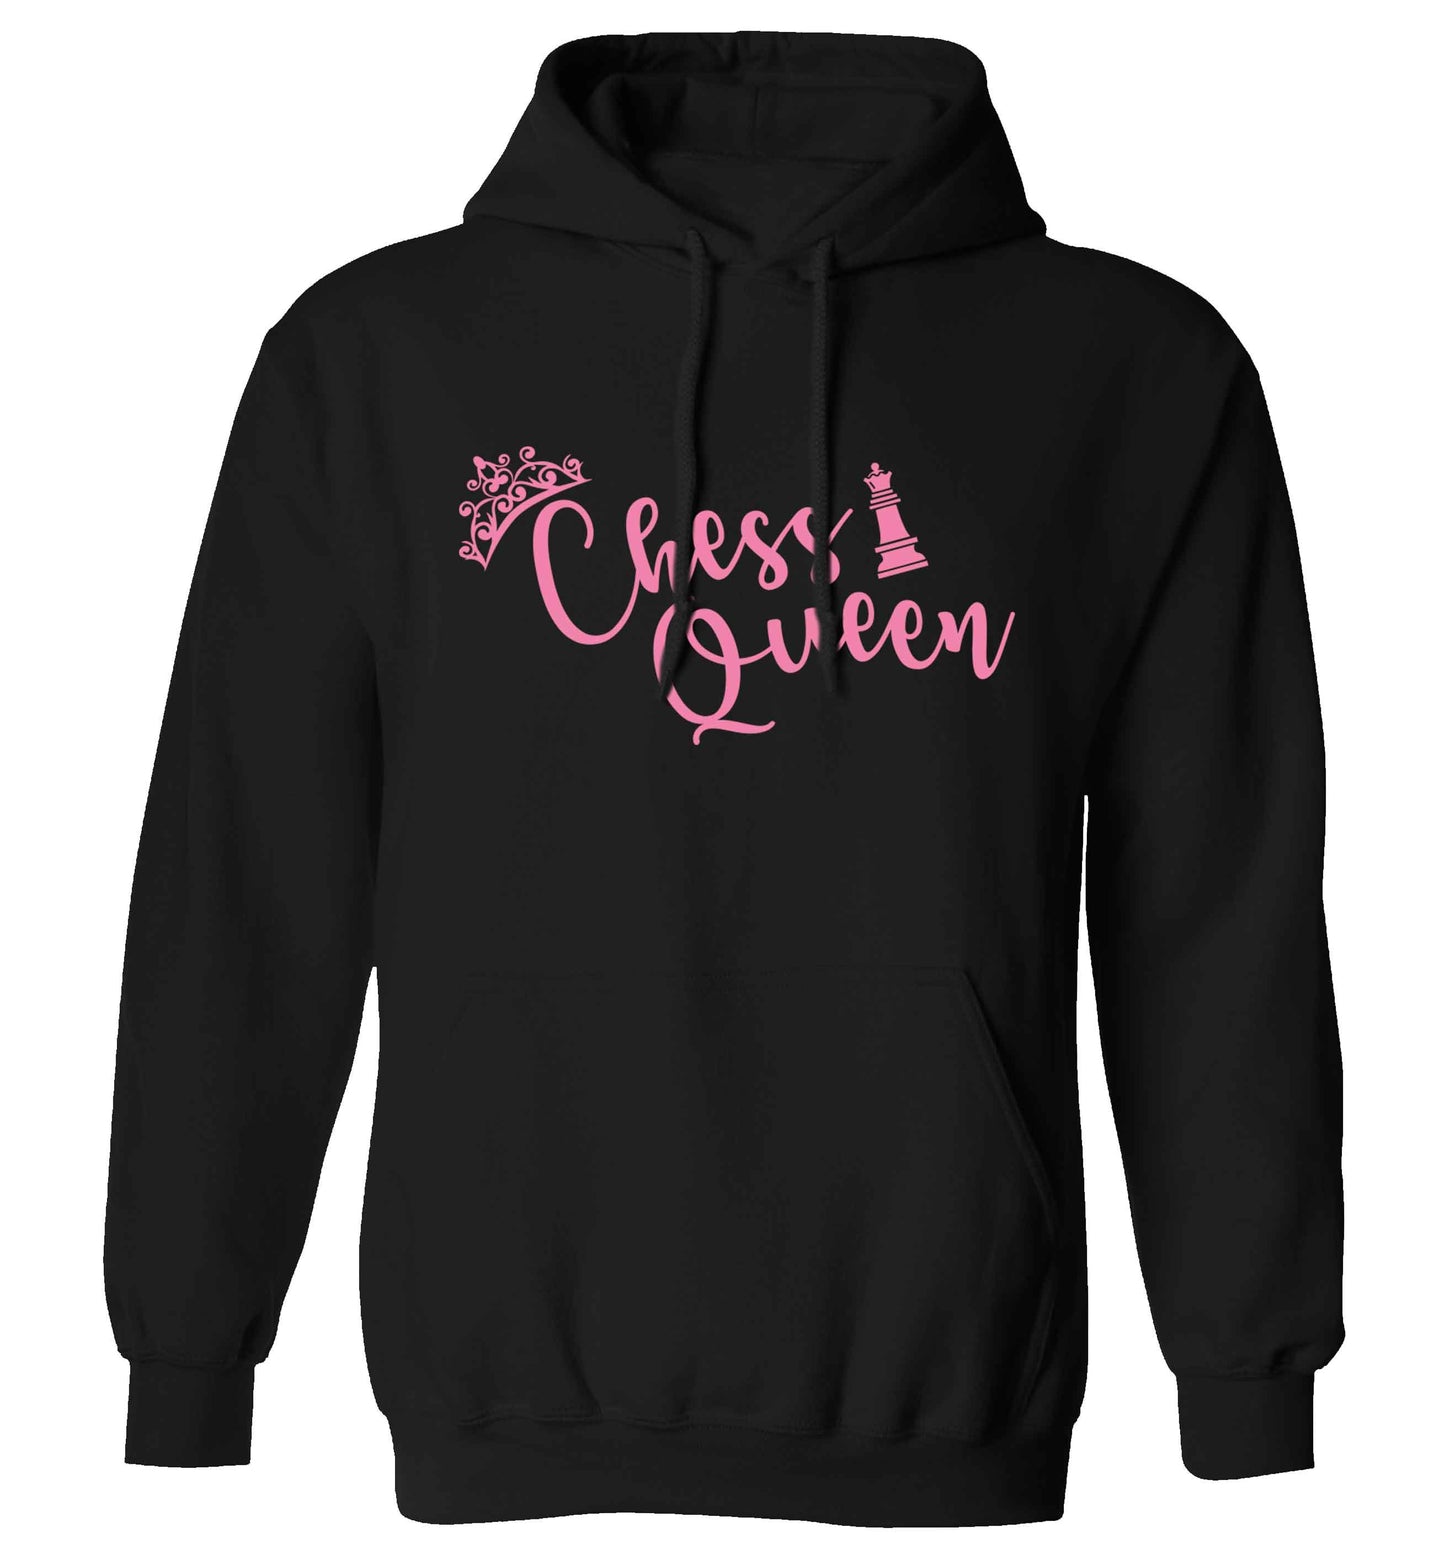 Pink chess queen  adults unisex black hoodie 2XL